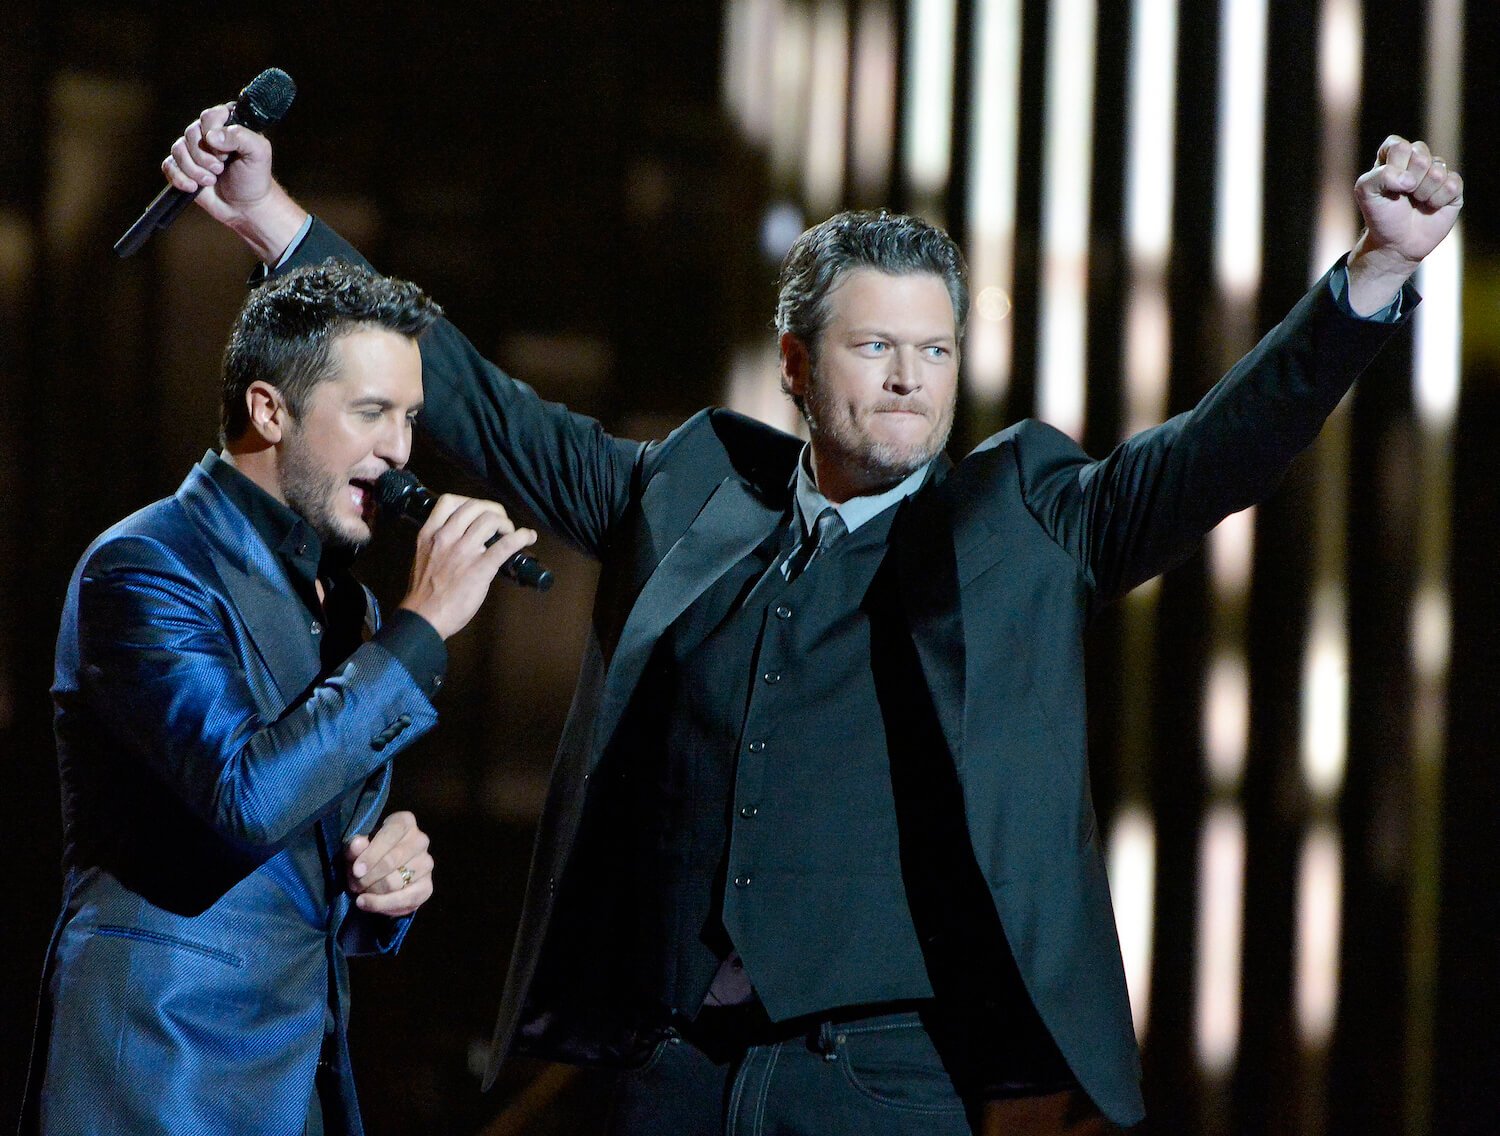 'The Voice' coach Blake Shelton and 'American Idol' judge Luke Bryan on stage together